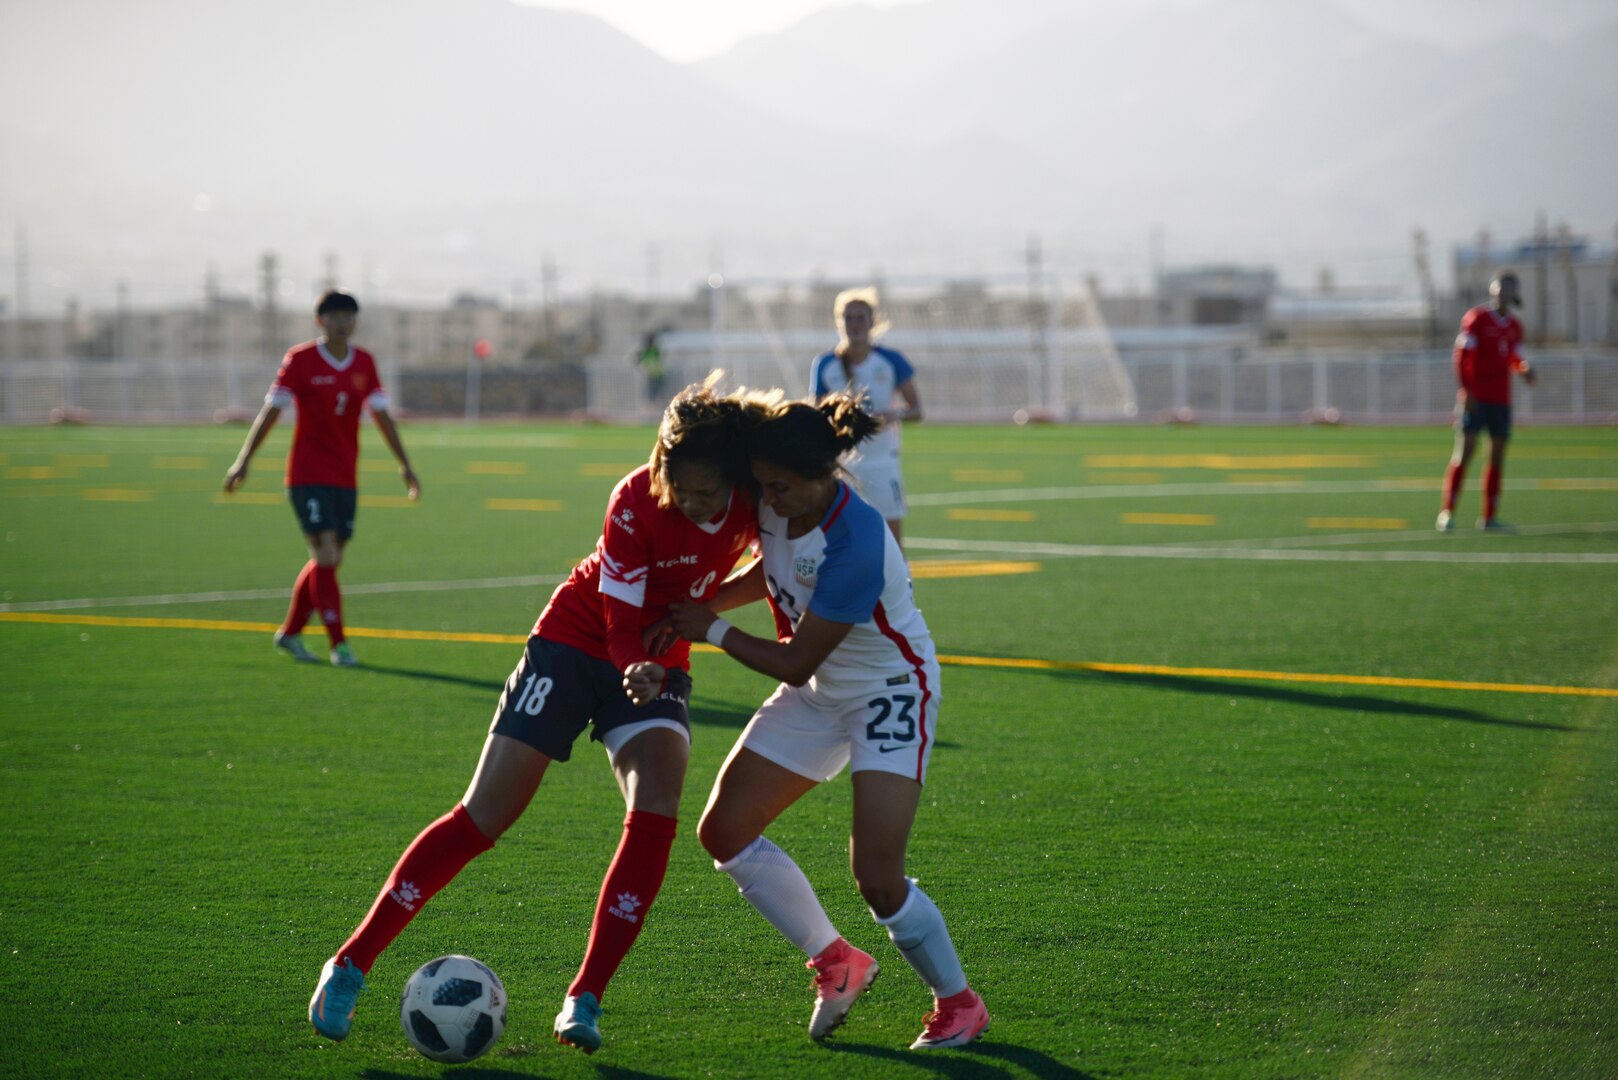 018 Conseil International du Sport Militaire (CISM) World Military Women’s Football Championship at Fort Bliss’ Stout Field June 24. International military teams squared off to eventually crown the best women soccer players among the international militaries participating.